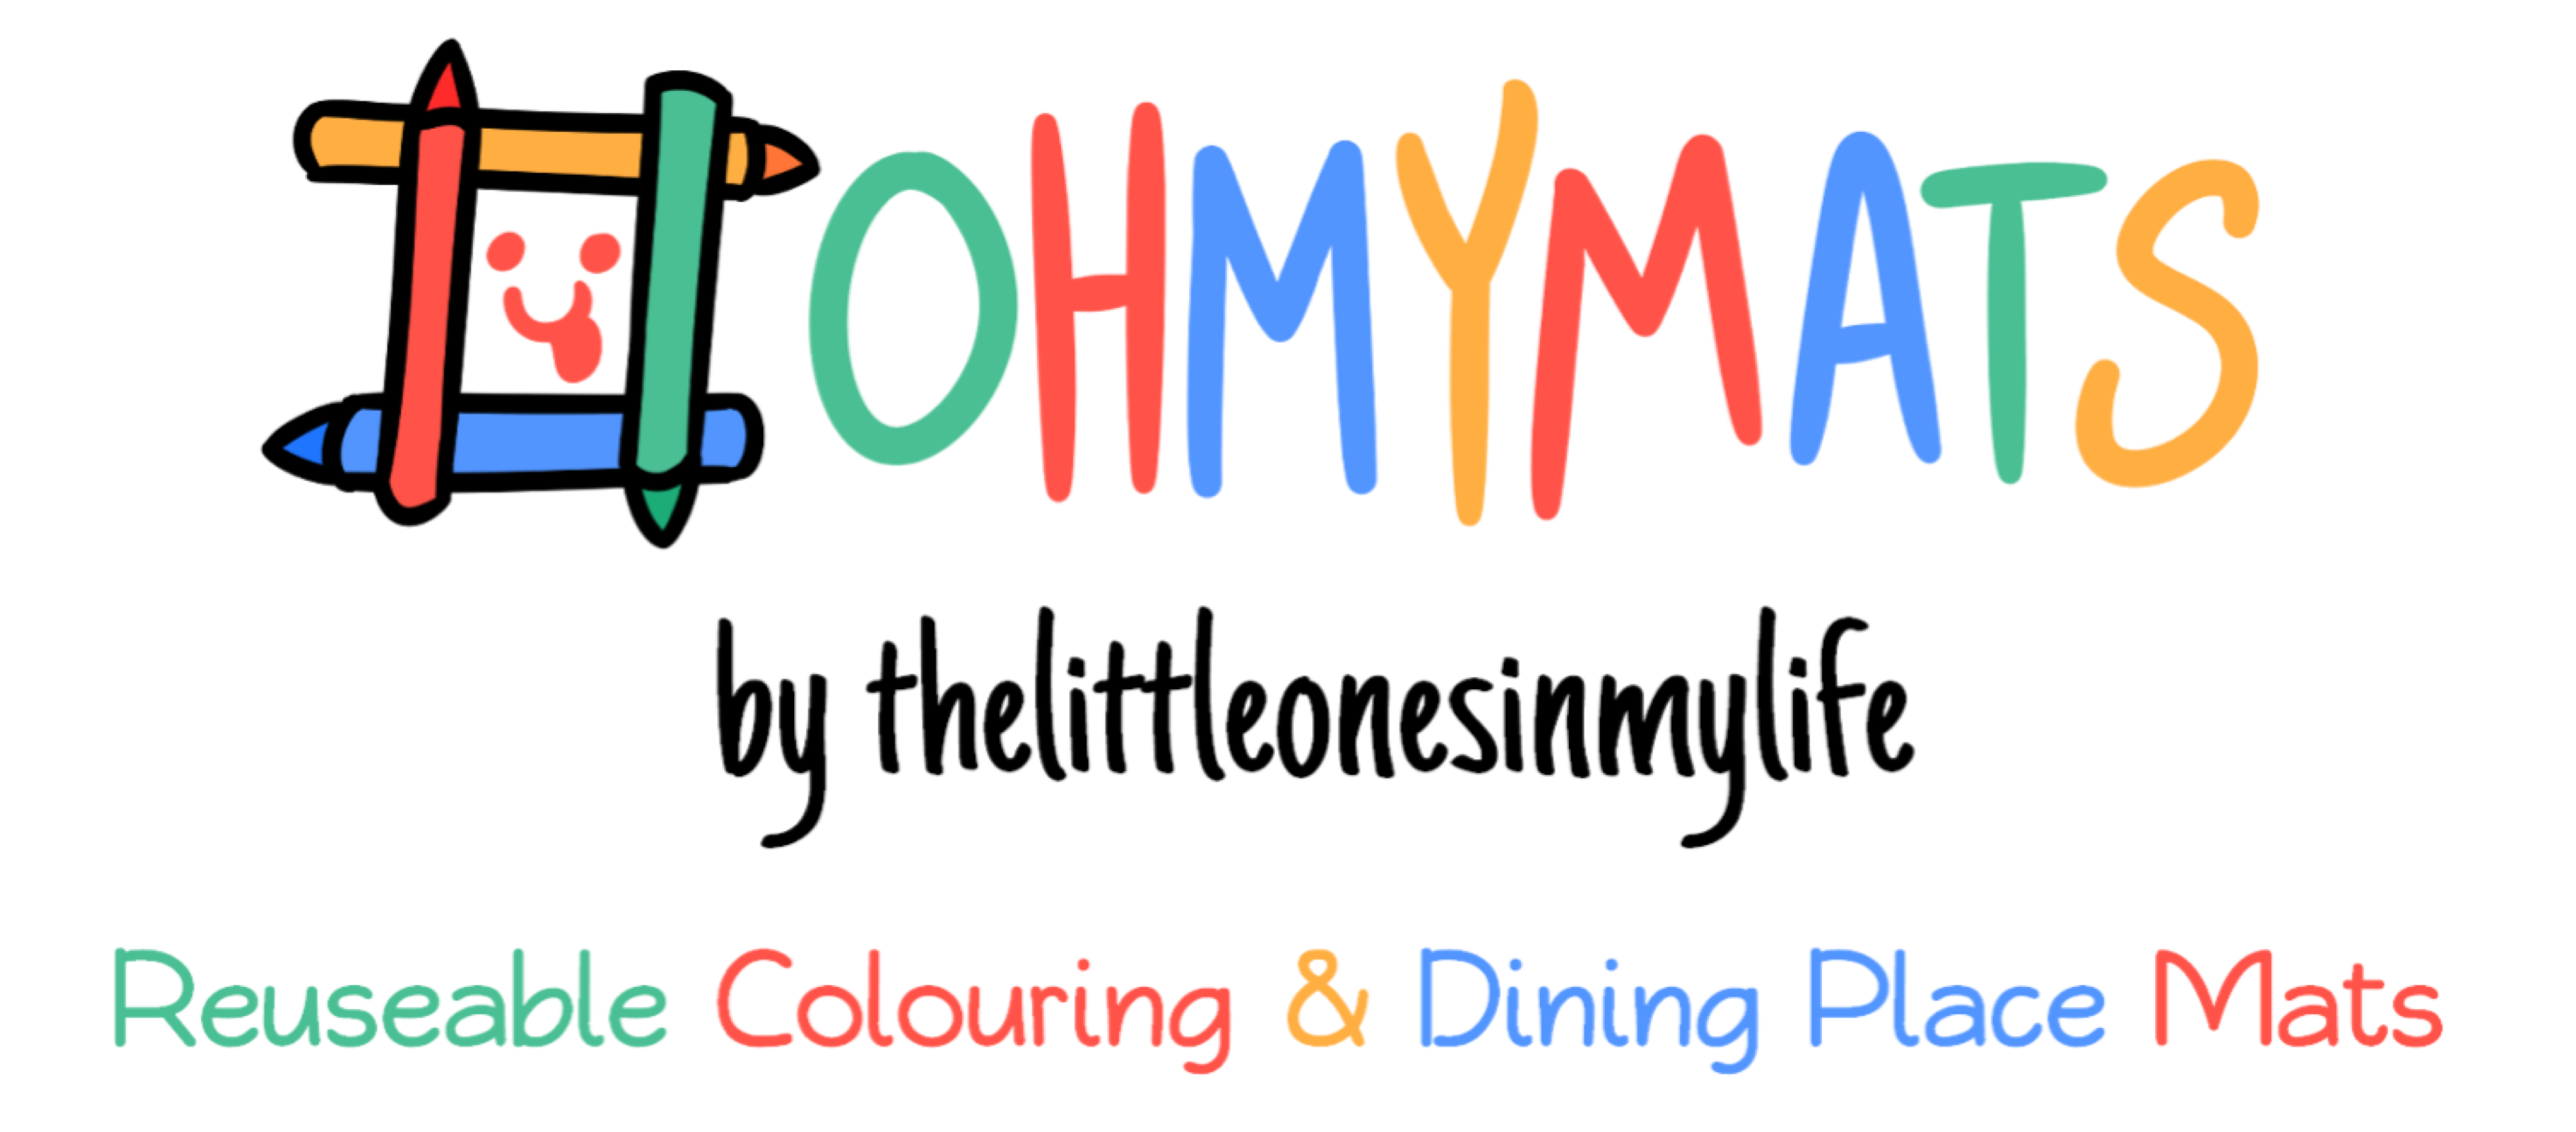 Reuseable colouring dining place mats